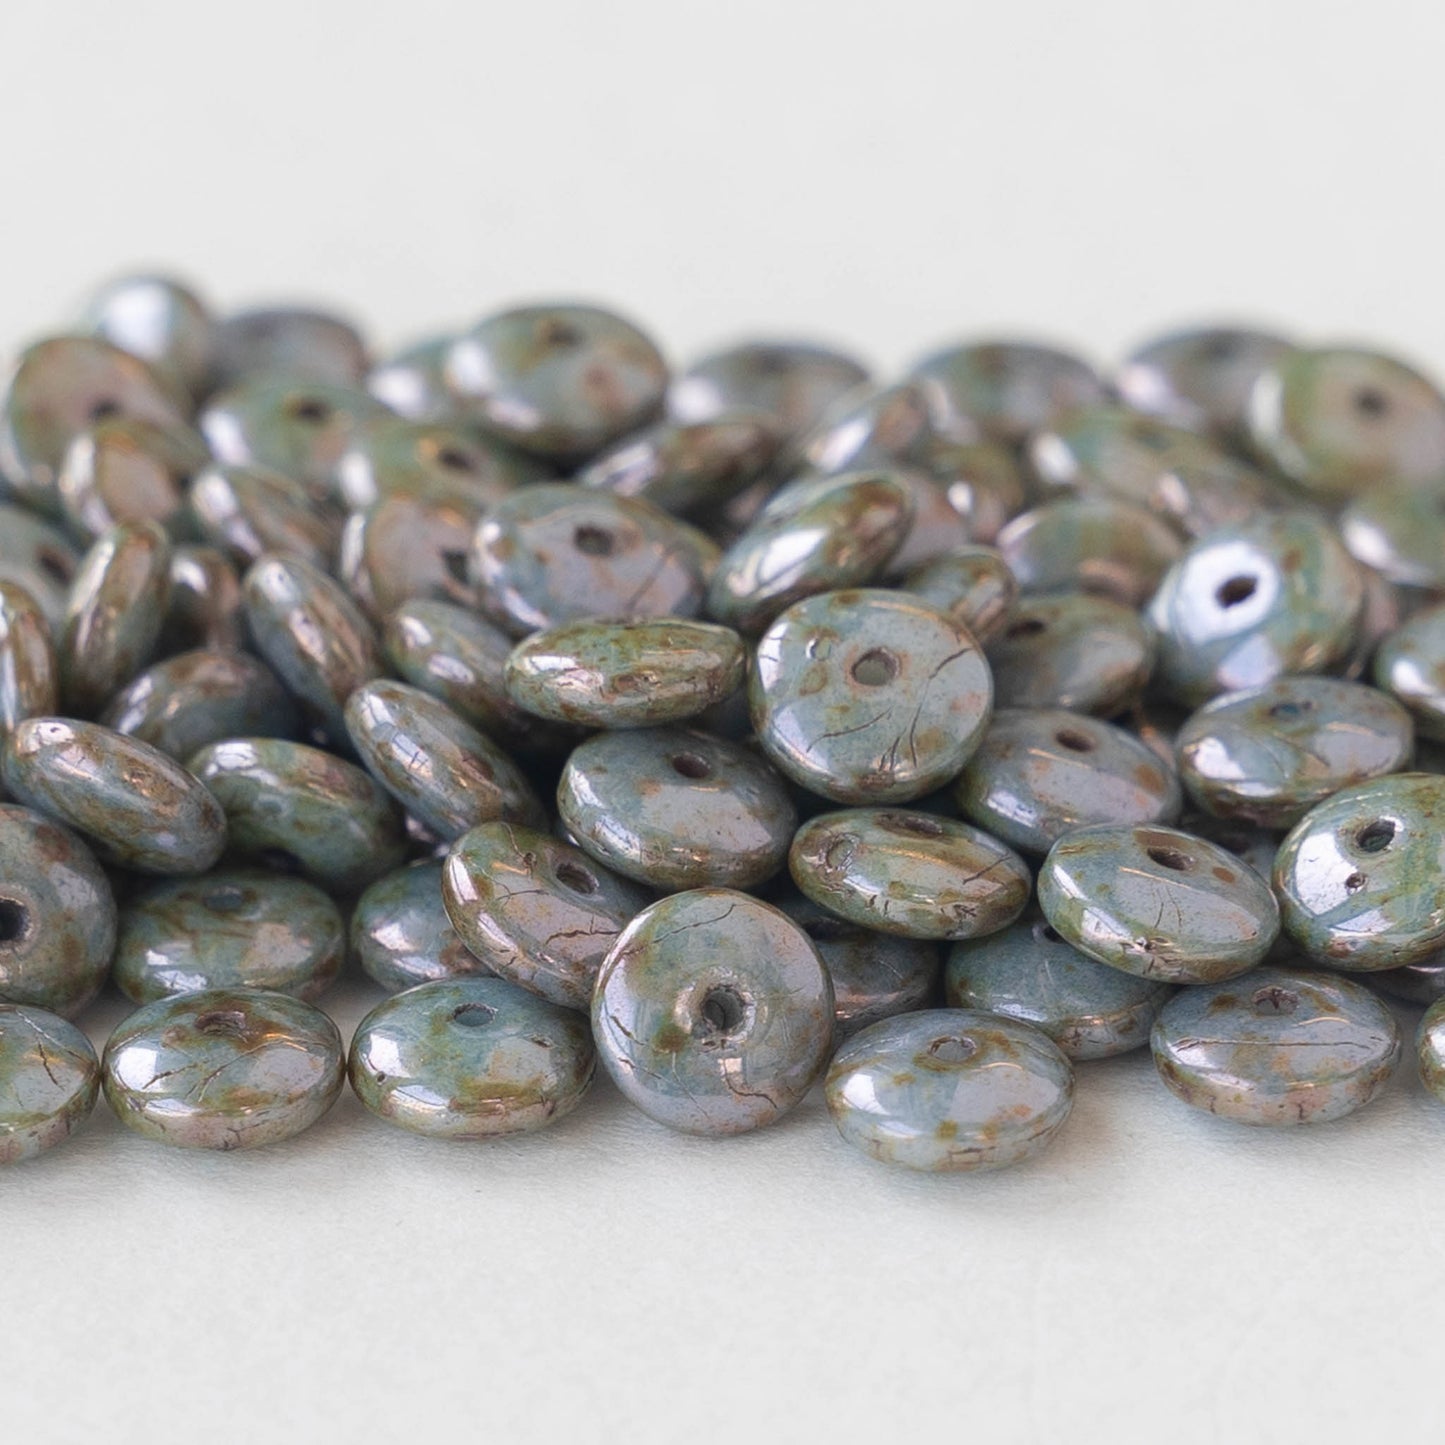 6mm Glass Rondelle Beads - Light Blue Picasso - 120 Beads